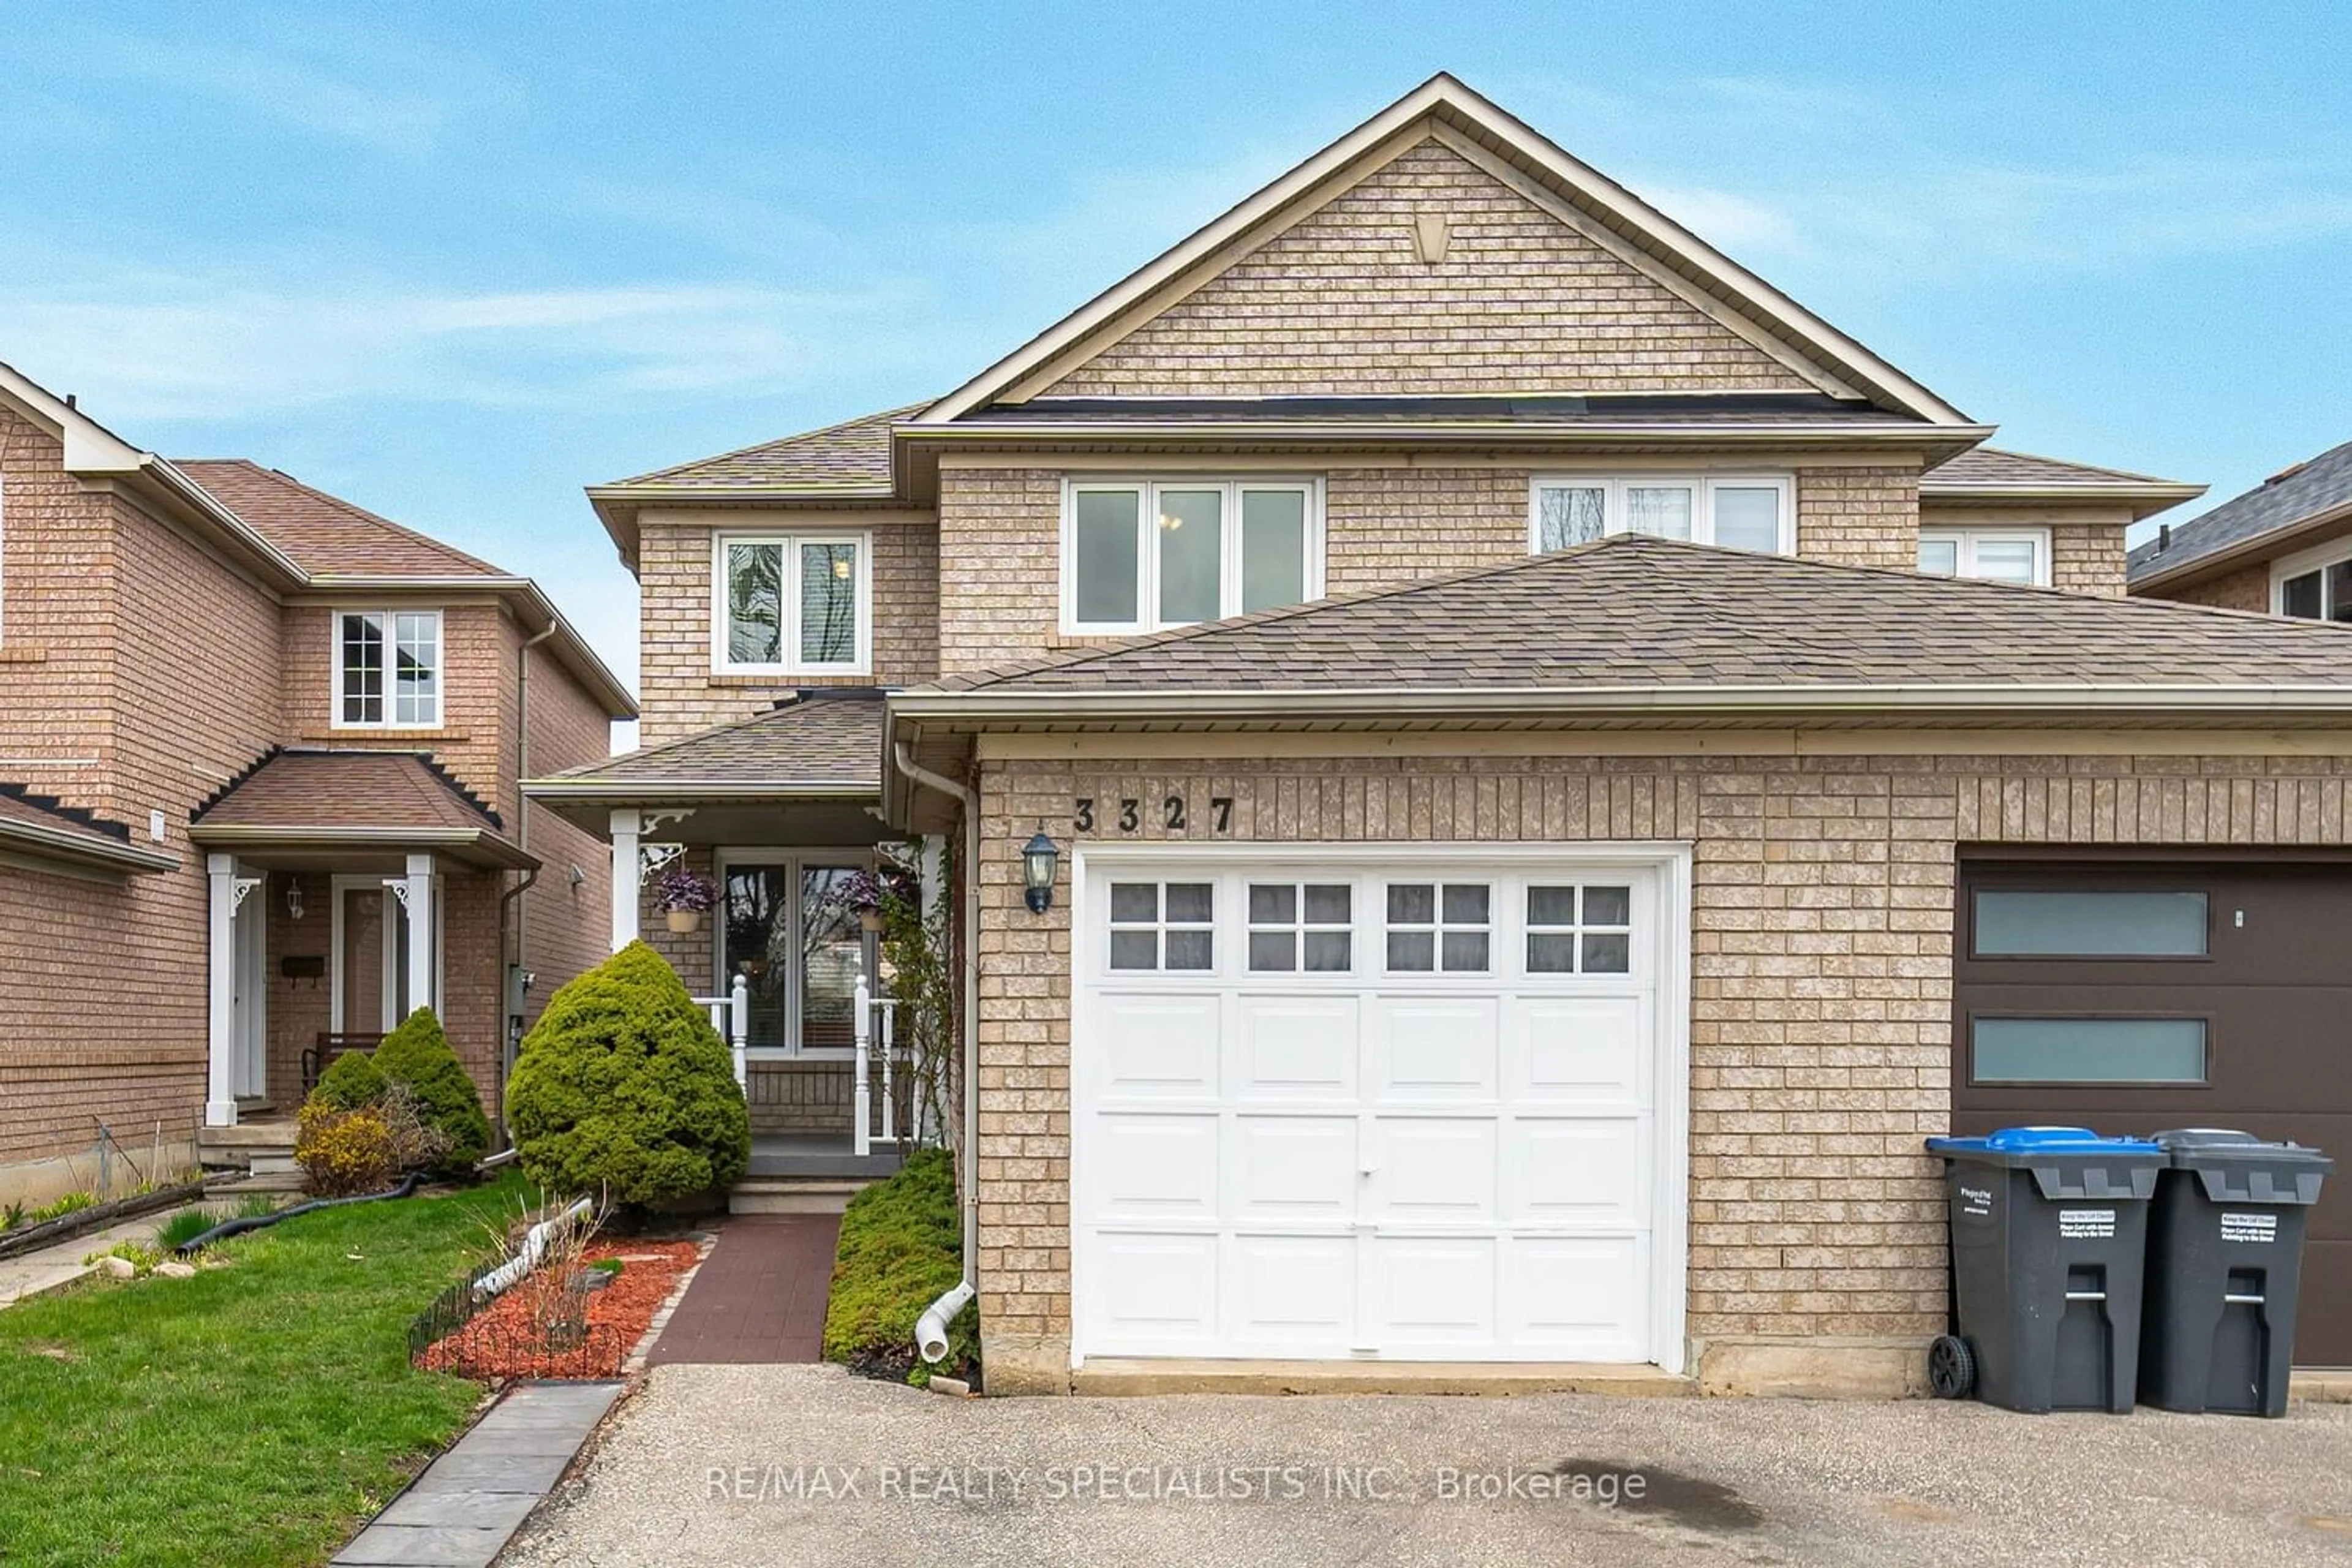 Home with brick exterior material for 3327 Spirea Terr, Mississauga Ontario L5N 7N3